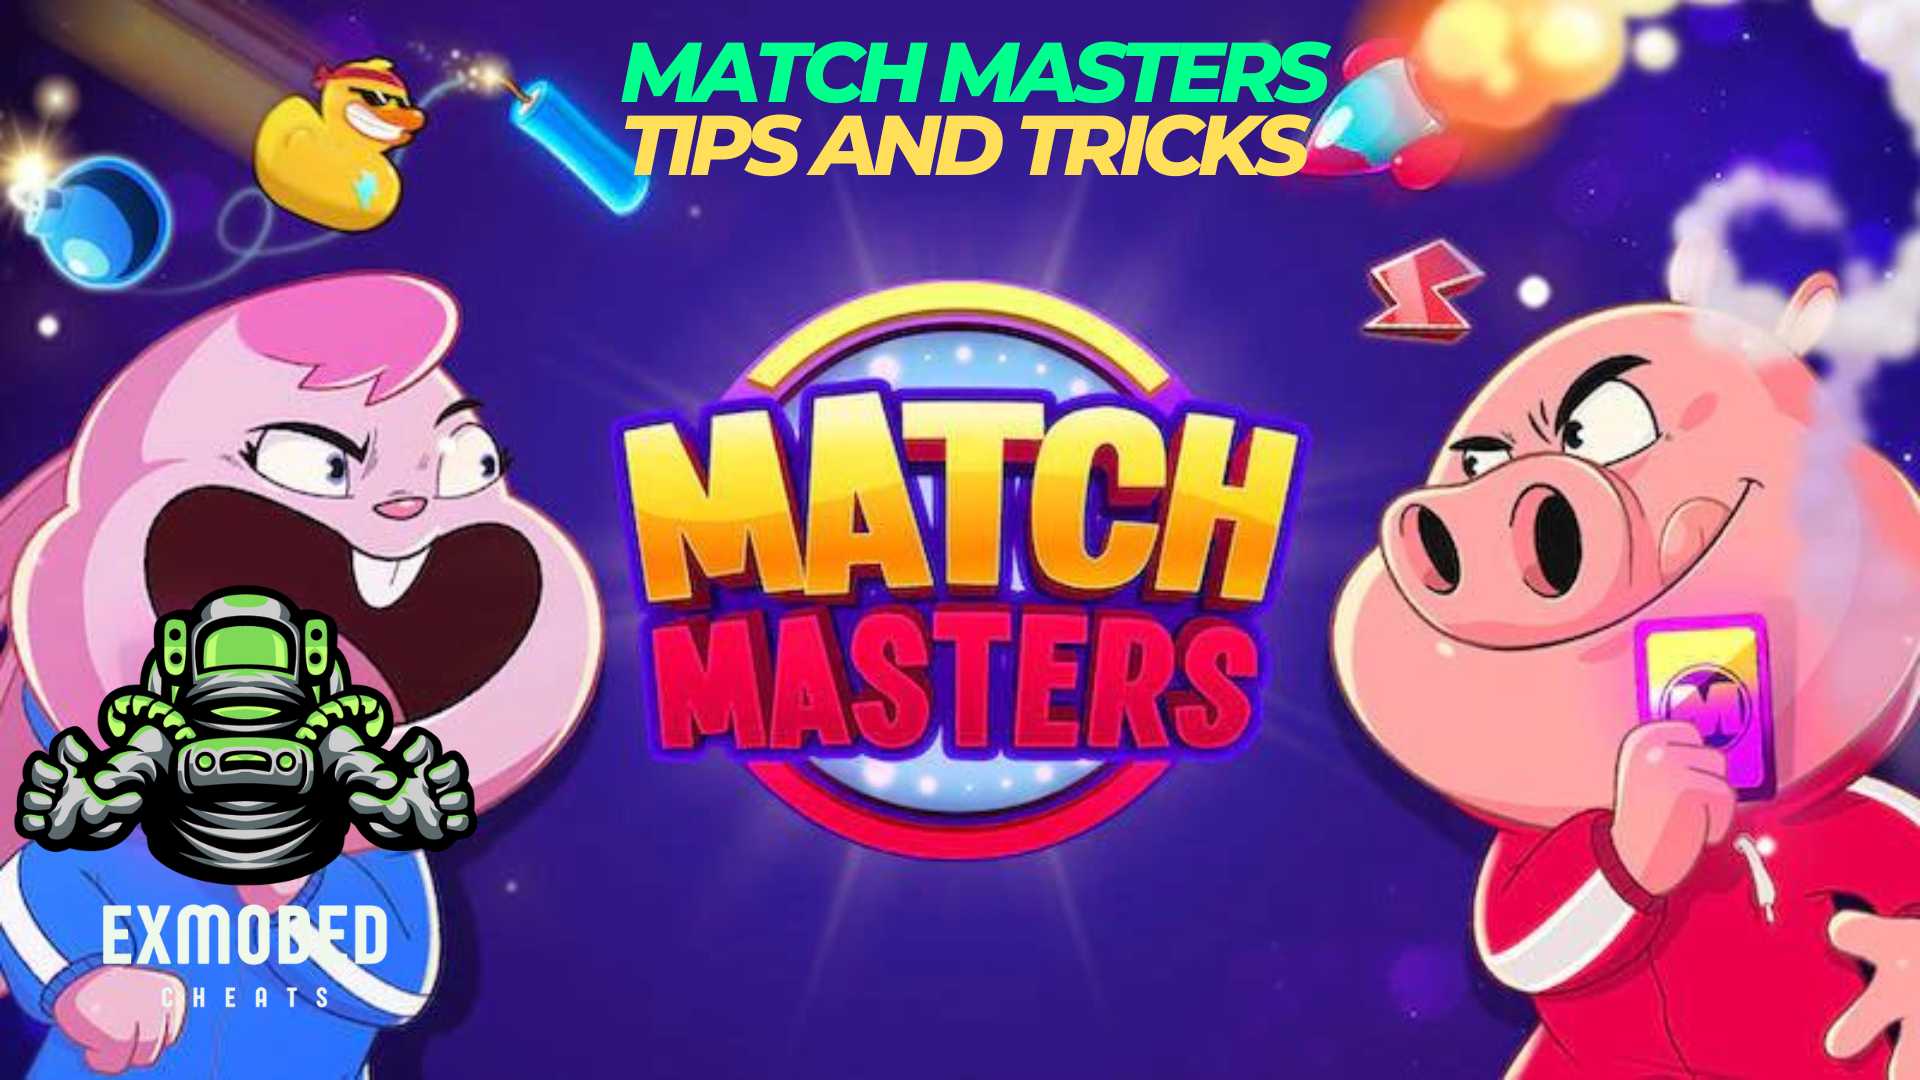 Match Masters tips and tricks